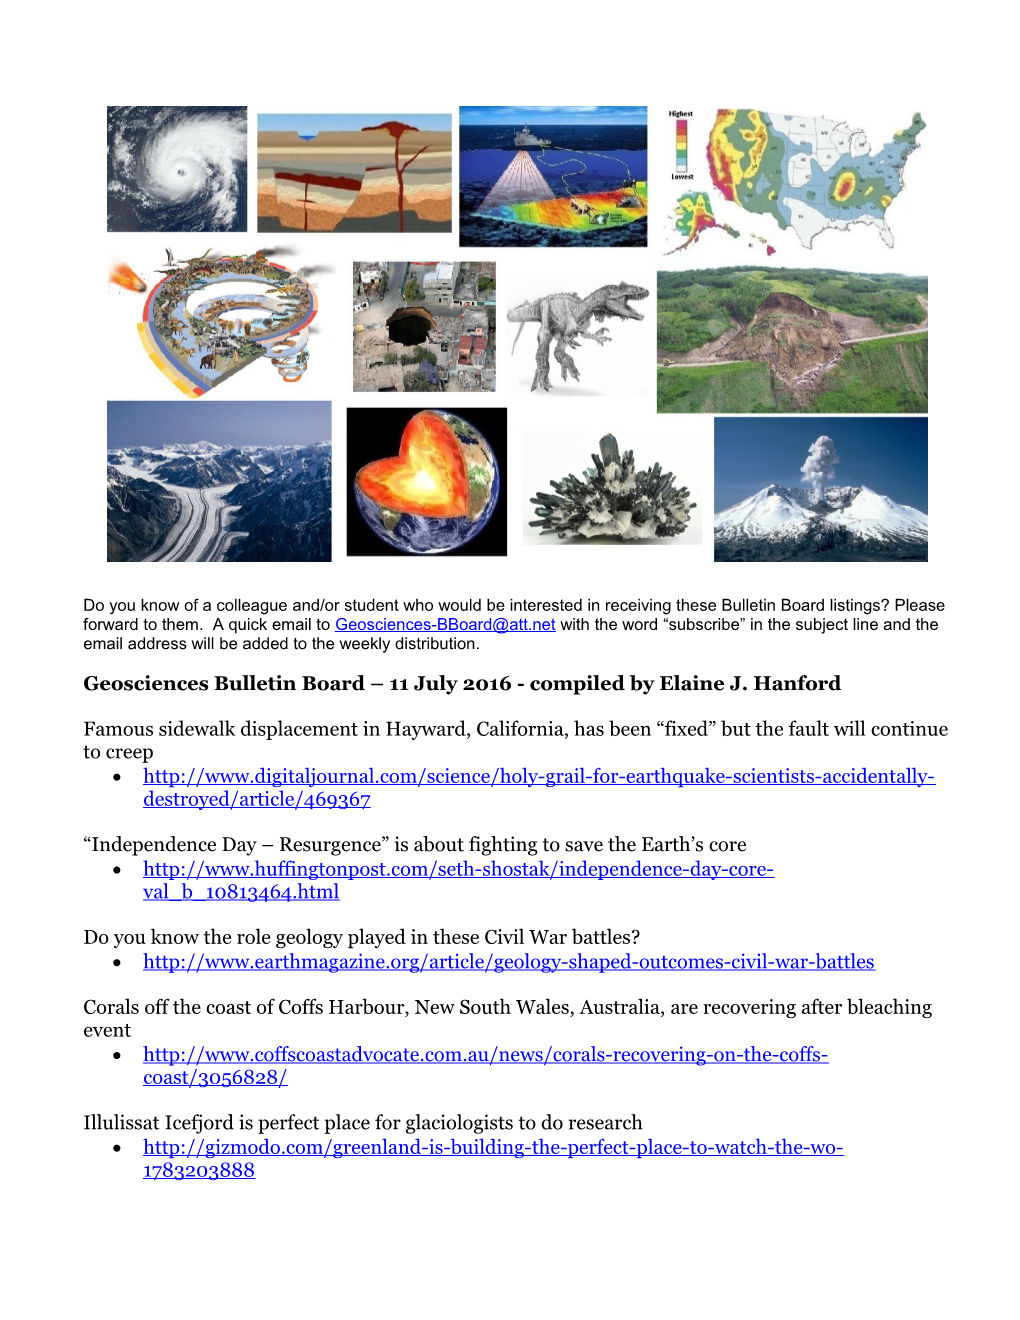 Geosciences Bulletin Board 11 July 2016- Compiled by Elaine J. Hanford